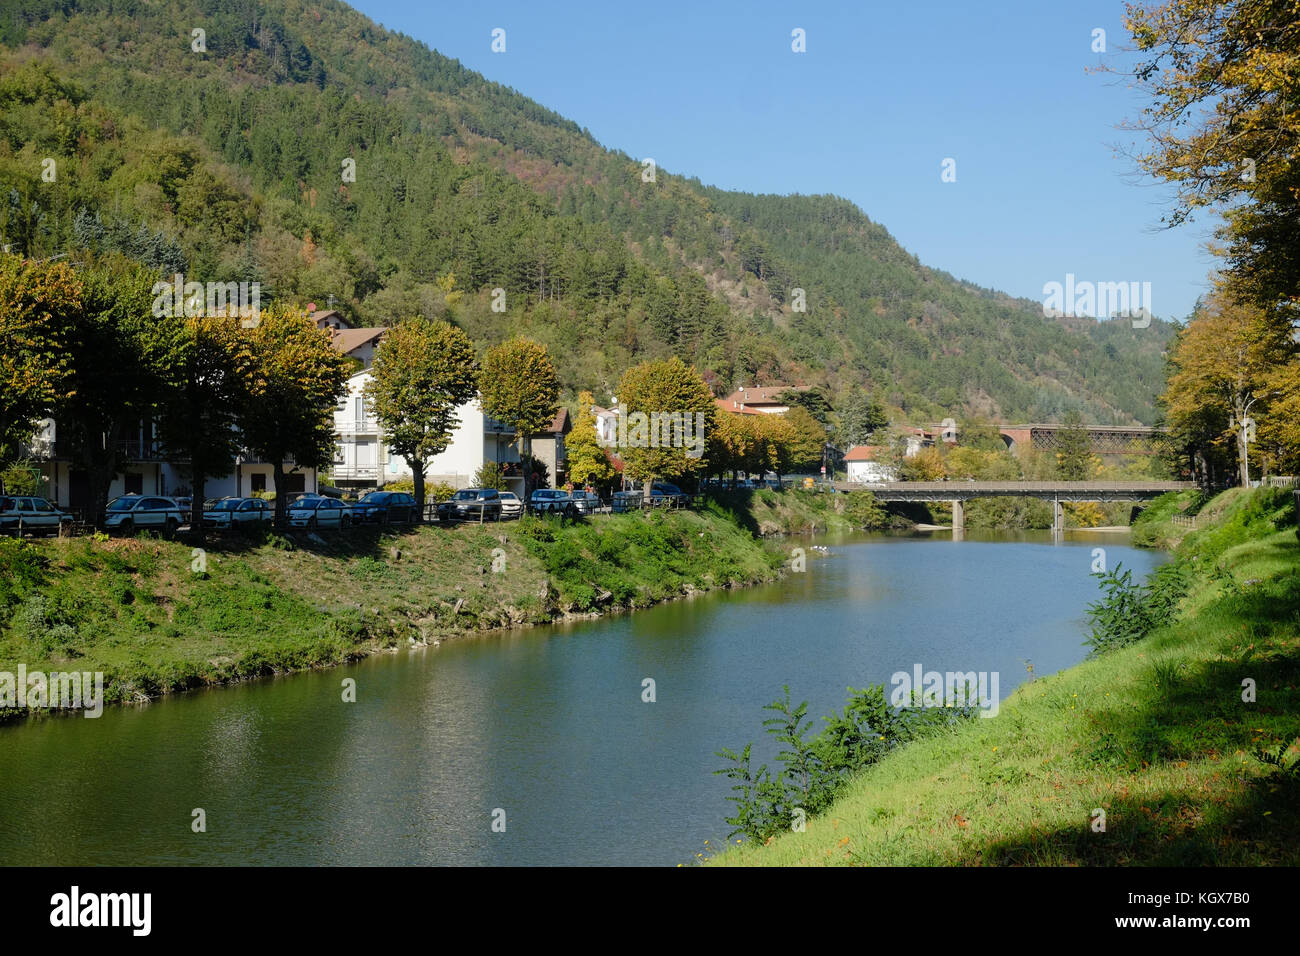 Autumn sunny day of the river just outside the old town of Marradi, Tuscany well know old town for the celebration of chestnuts every year on October. Stock Photo